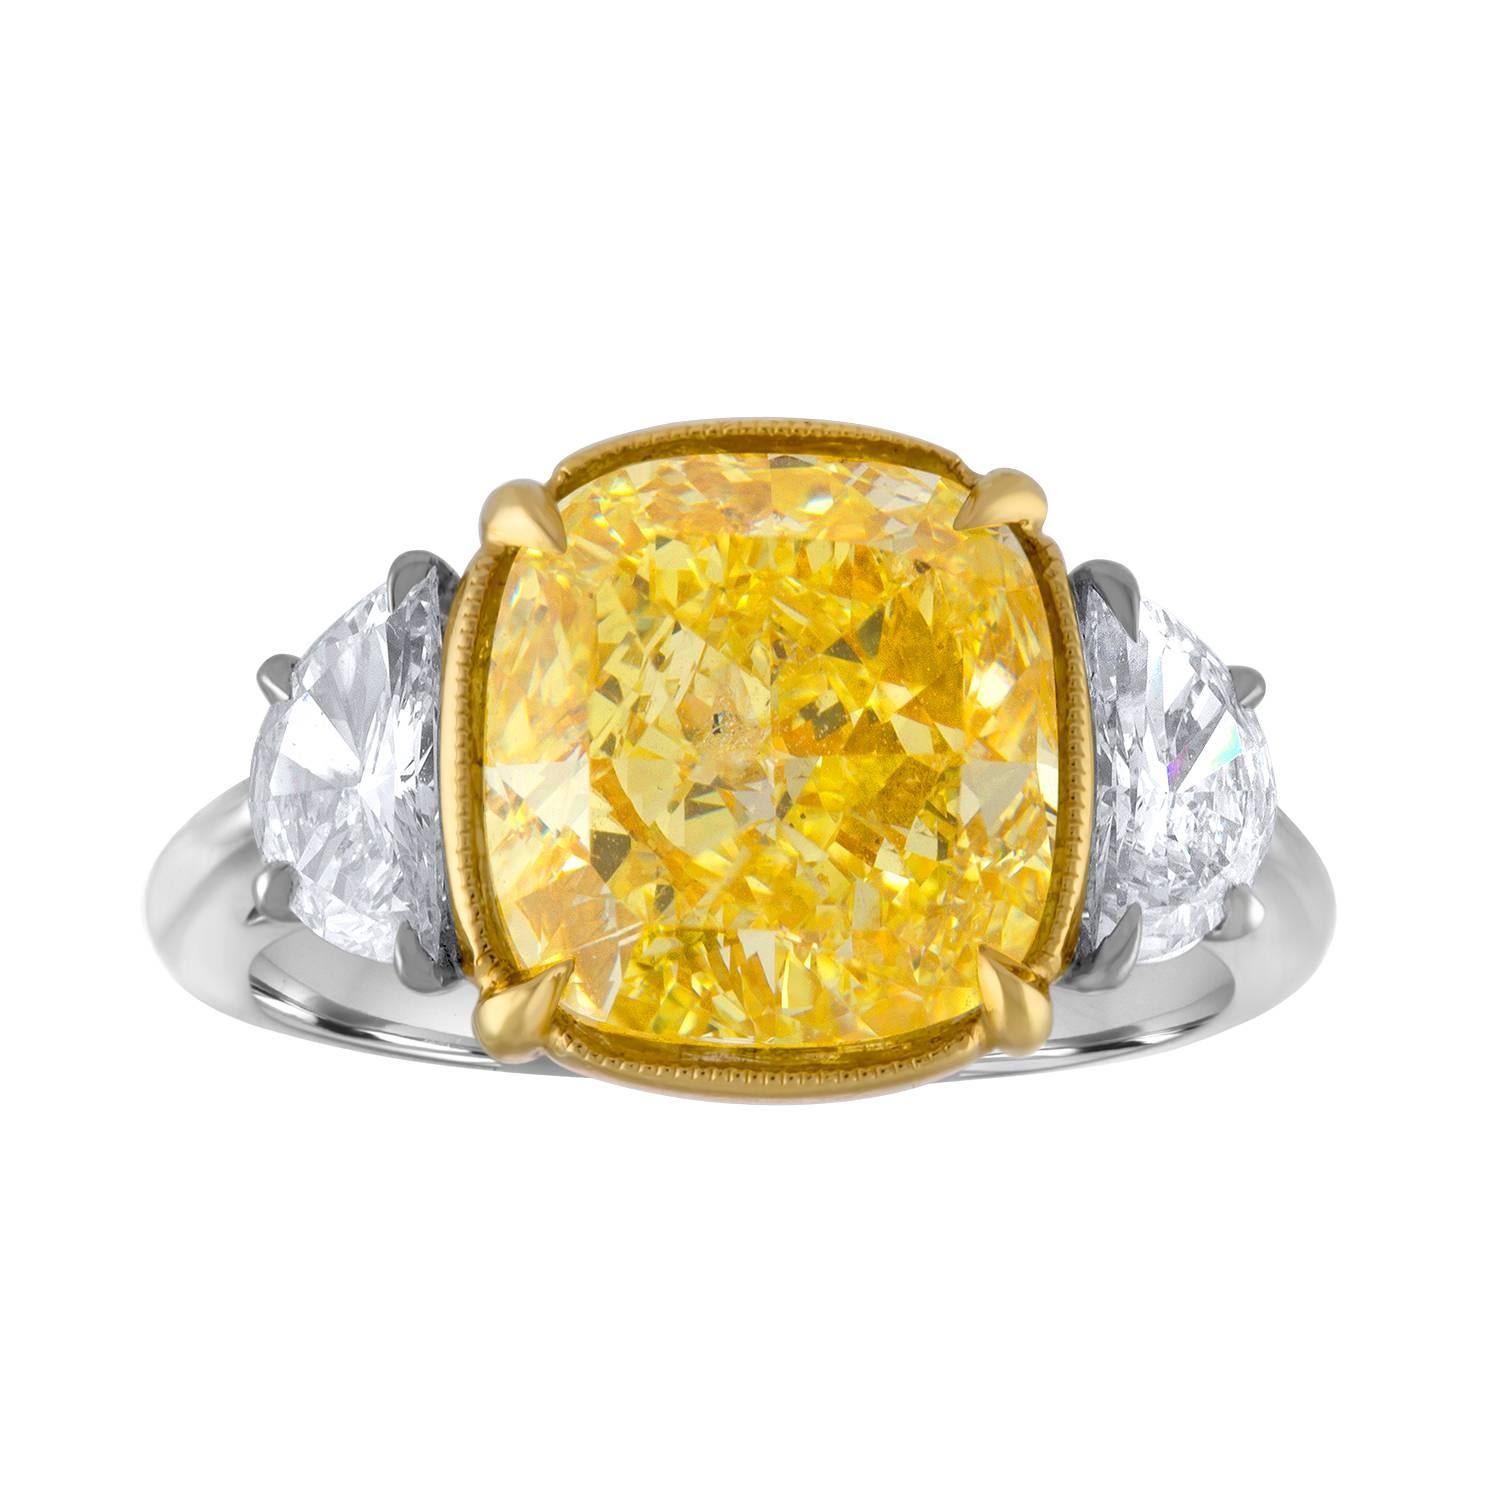 Beautiful Platinum and 18K Yellow Gold Hand Crafted Mounting. The Center is 5.04 Carat Cushion Cut Diamond which is GIA Certified to be Fancy Intense Yellow. 
GIA Certificate Number is - 17217092.

The Center Diamond is set in 18K Yellow Gold .
Two